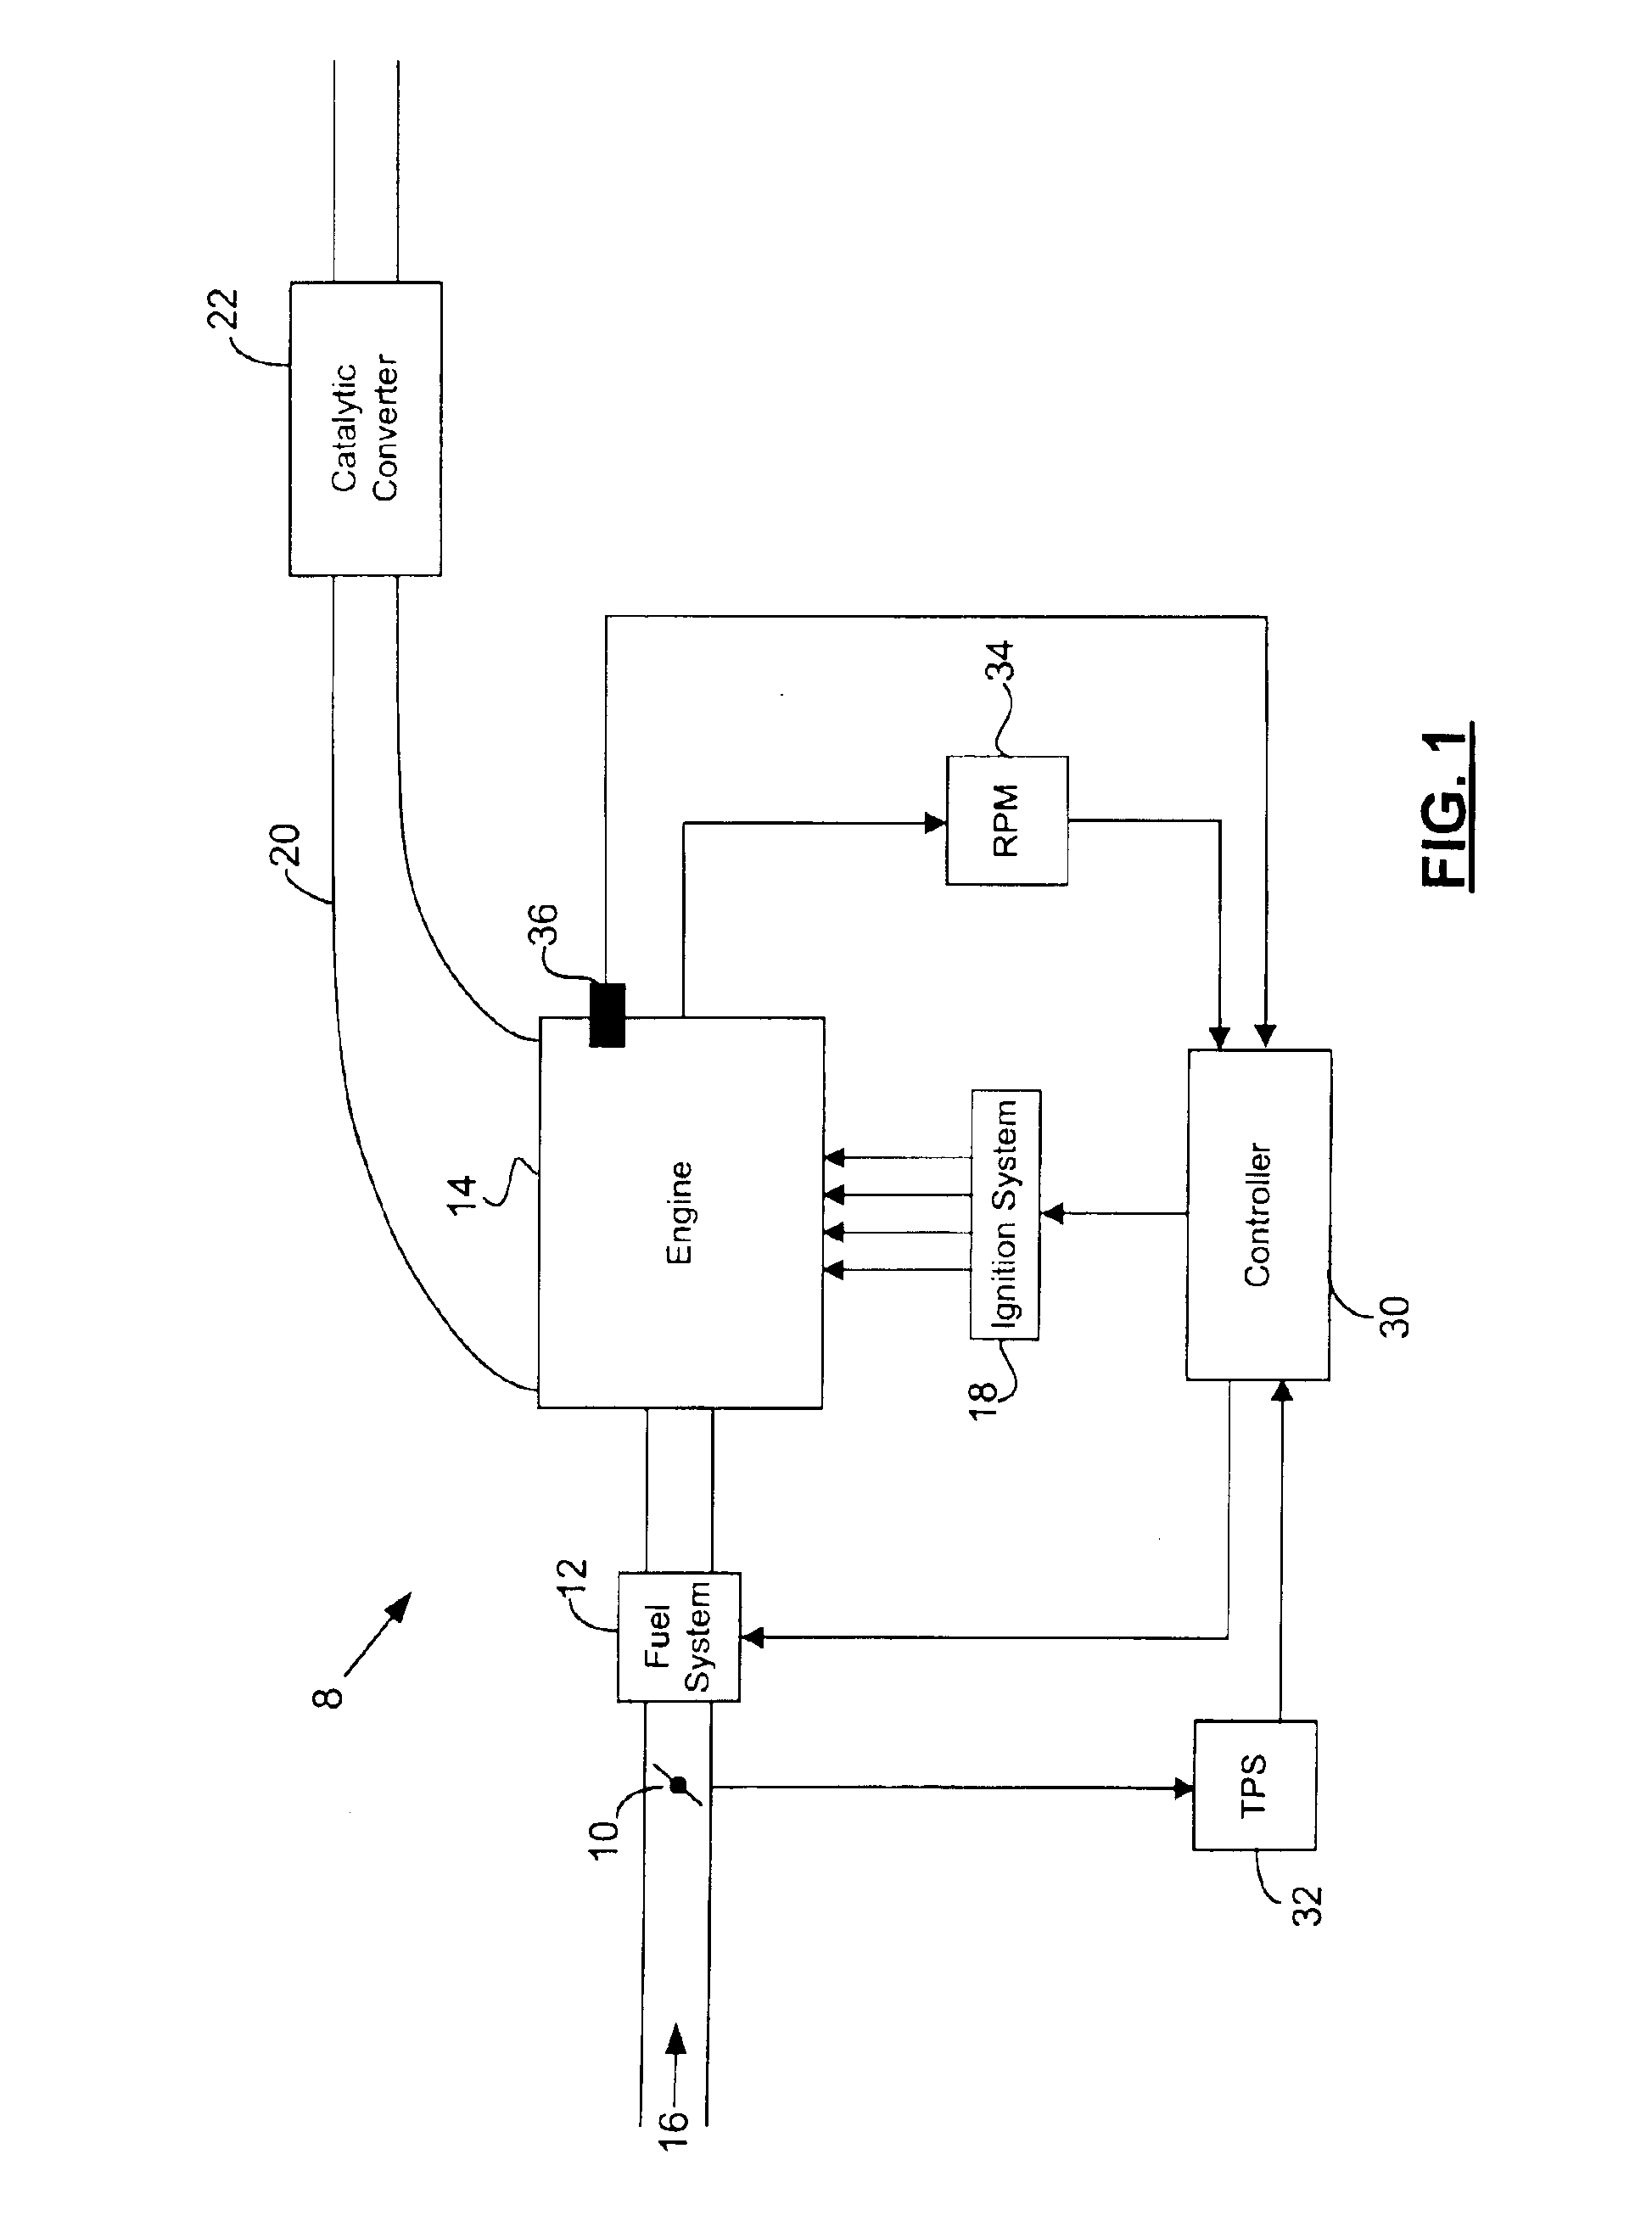 Method of preventing preignition for an internal combustion engine